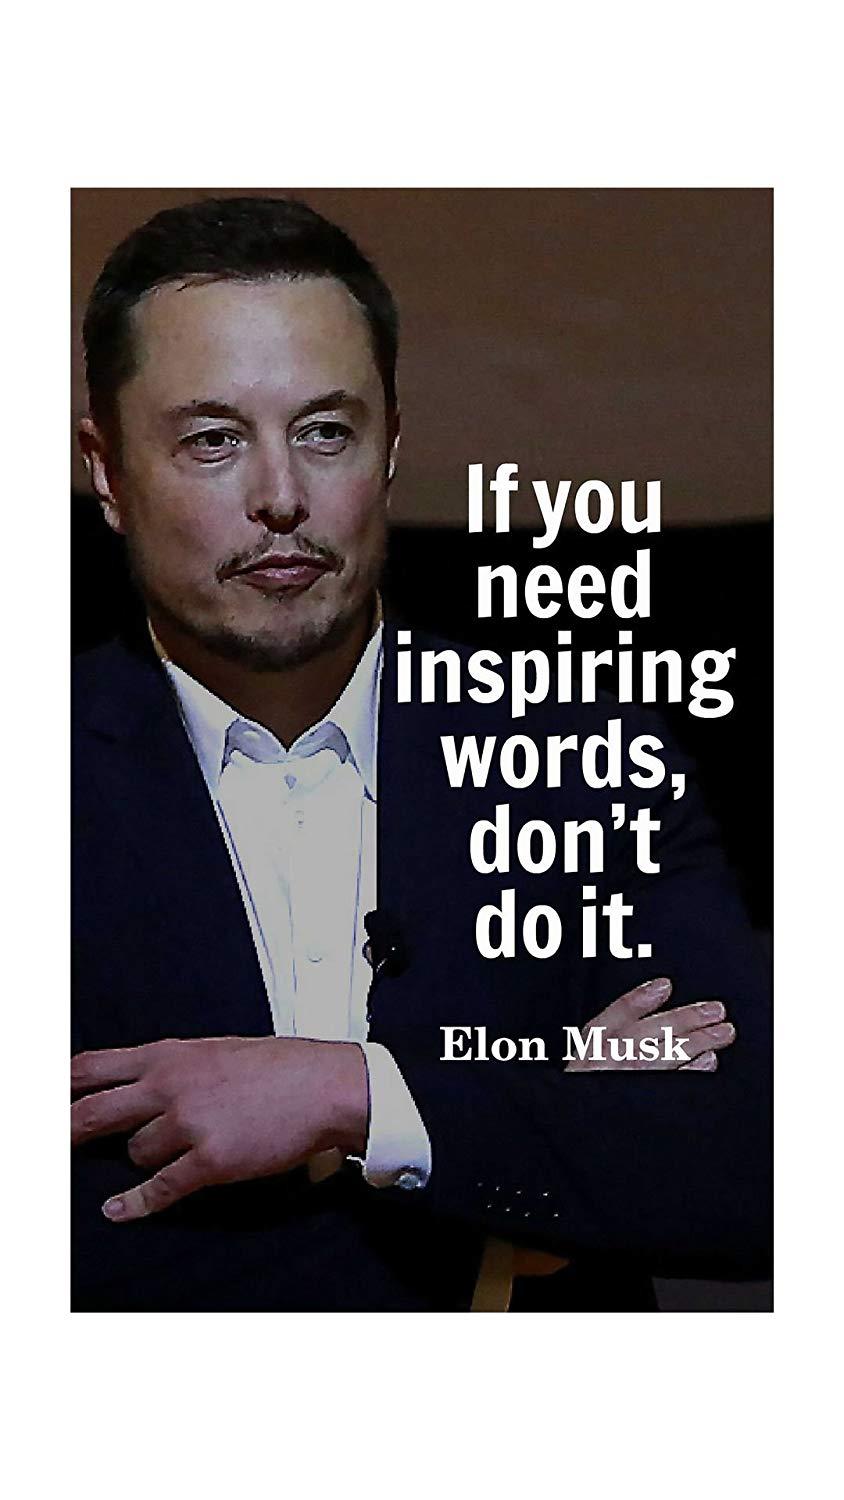 Elon Musk Quotes Mobile Wallpapers - Wallpaper Cave